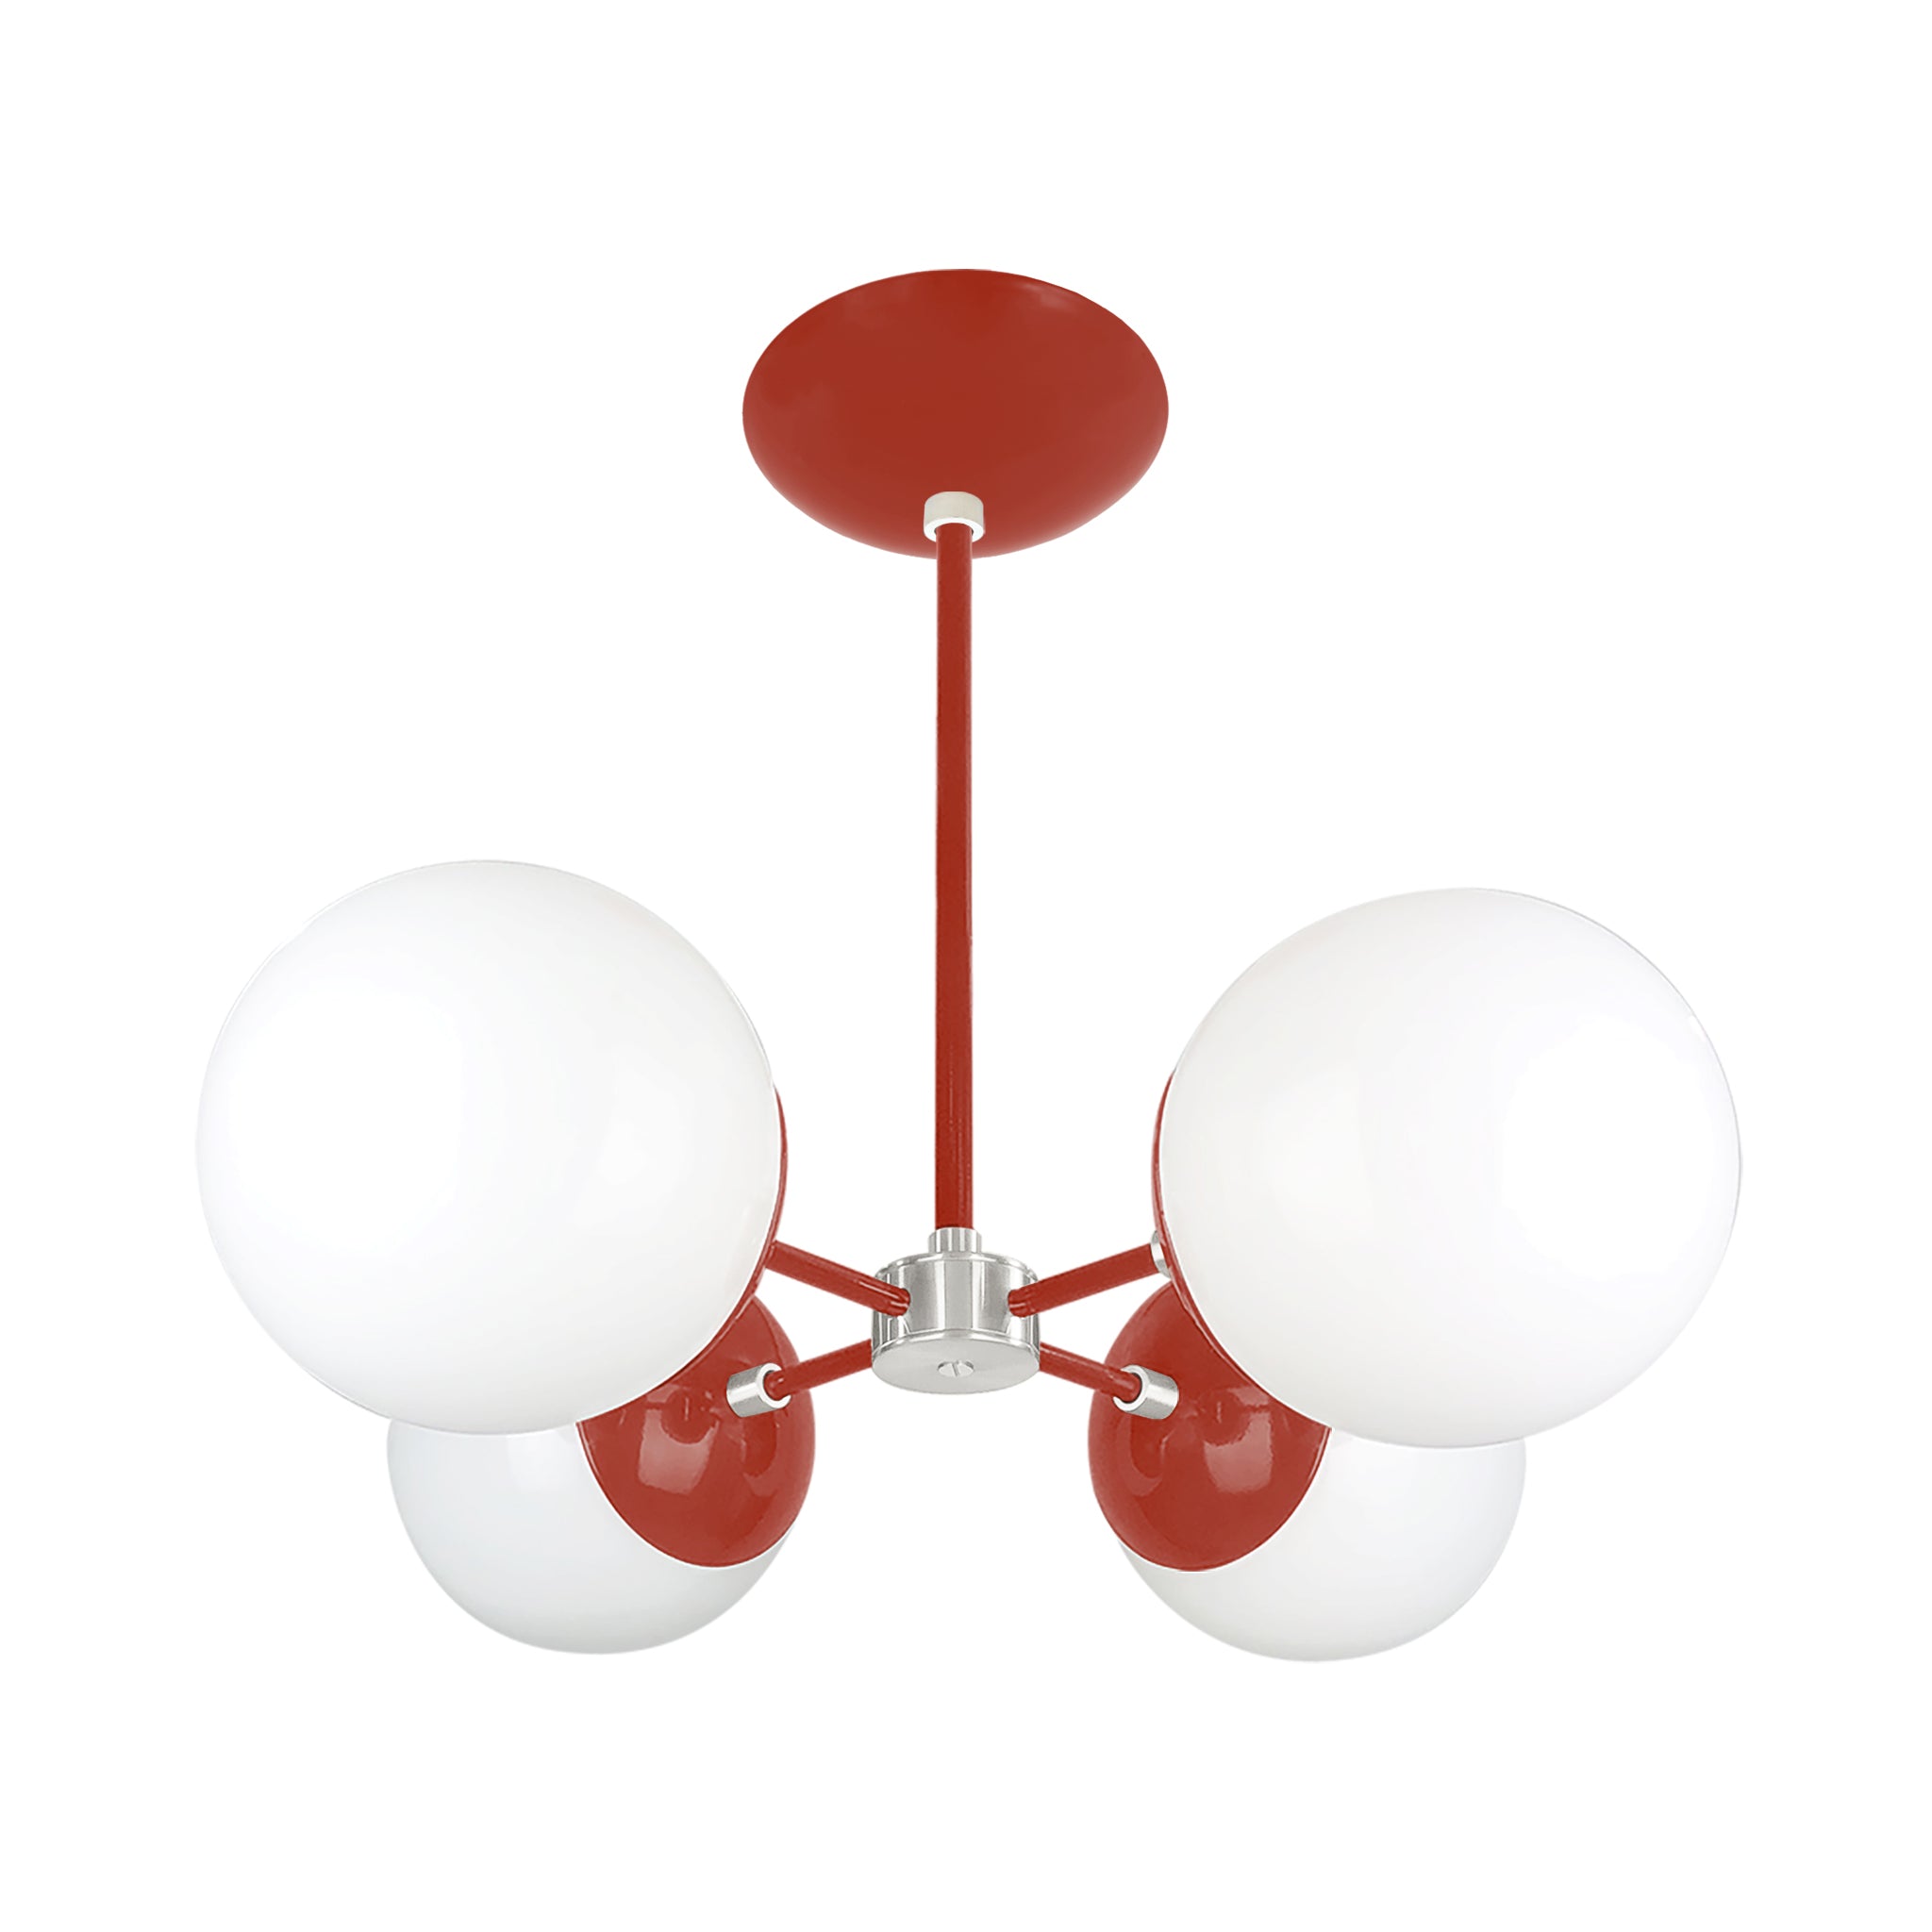 Nickel and riding hood red color Orbi chandelier Dutton Brown lighting